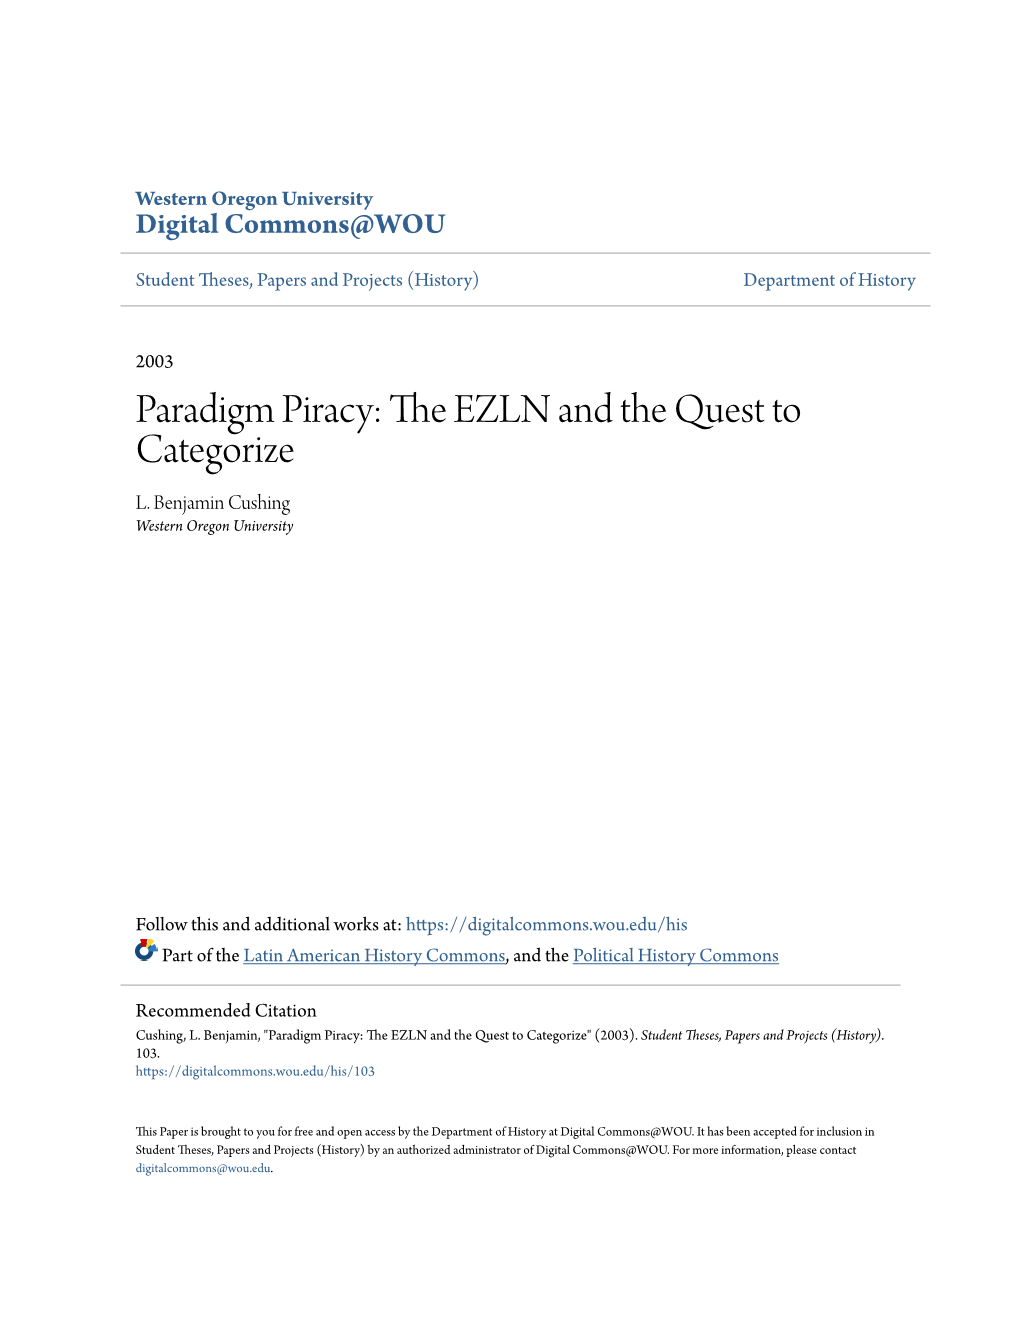 Paradigm Piracy: the EZLN and the Quest to Categorize